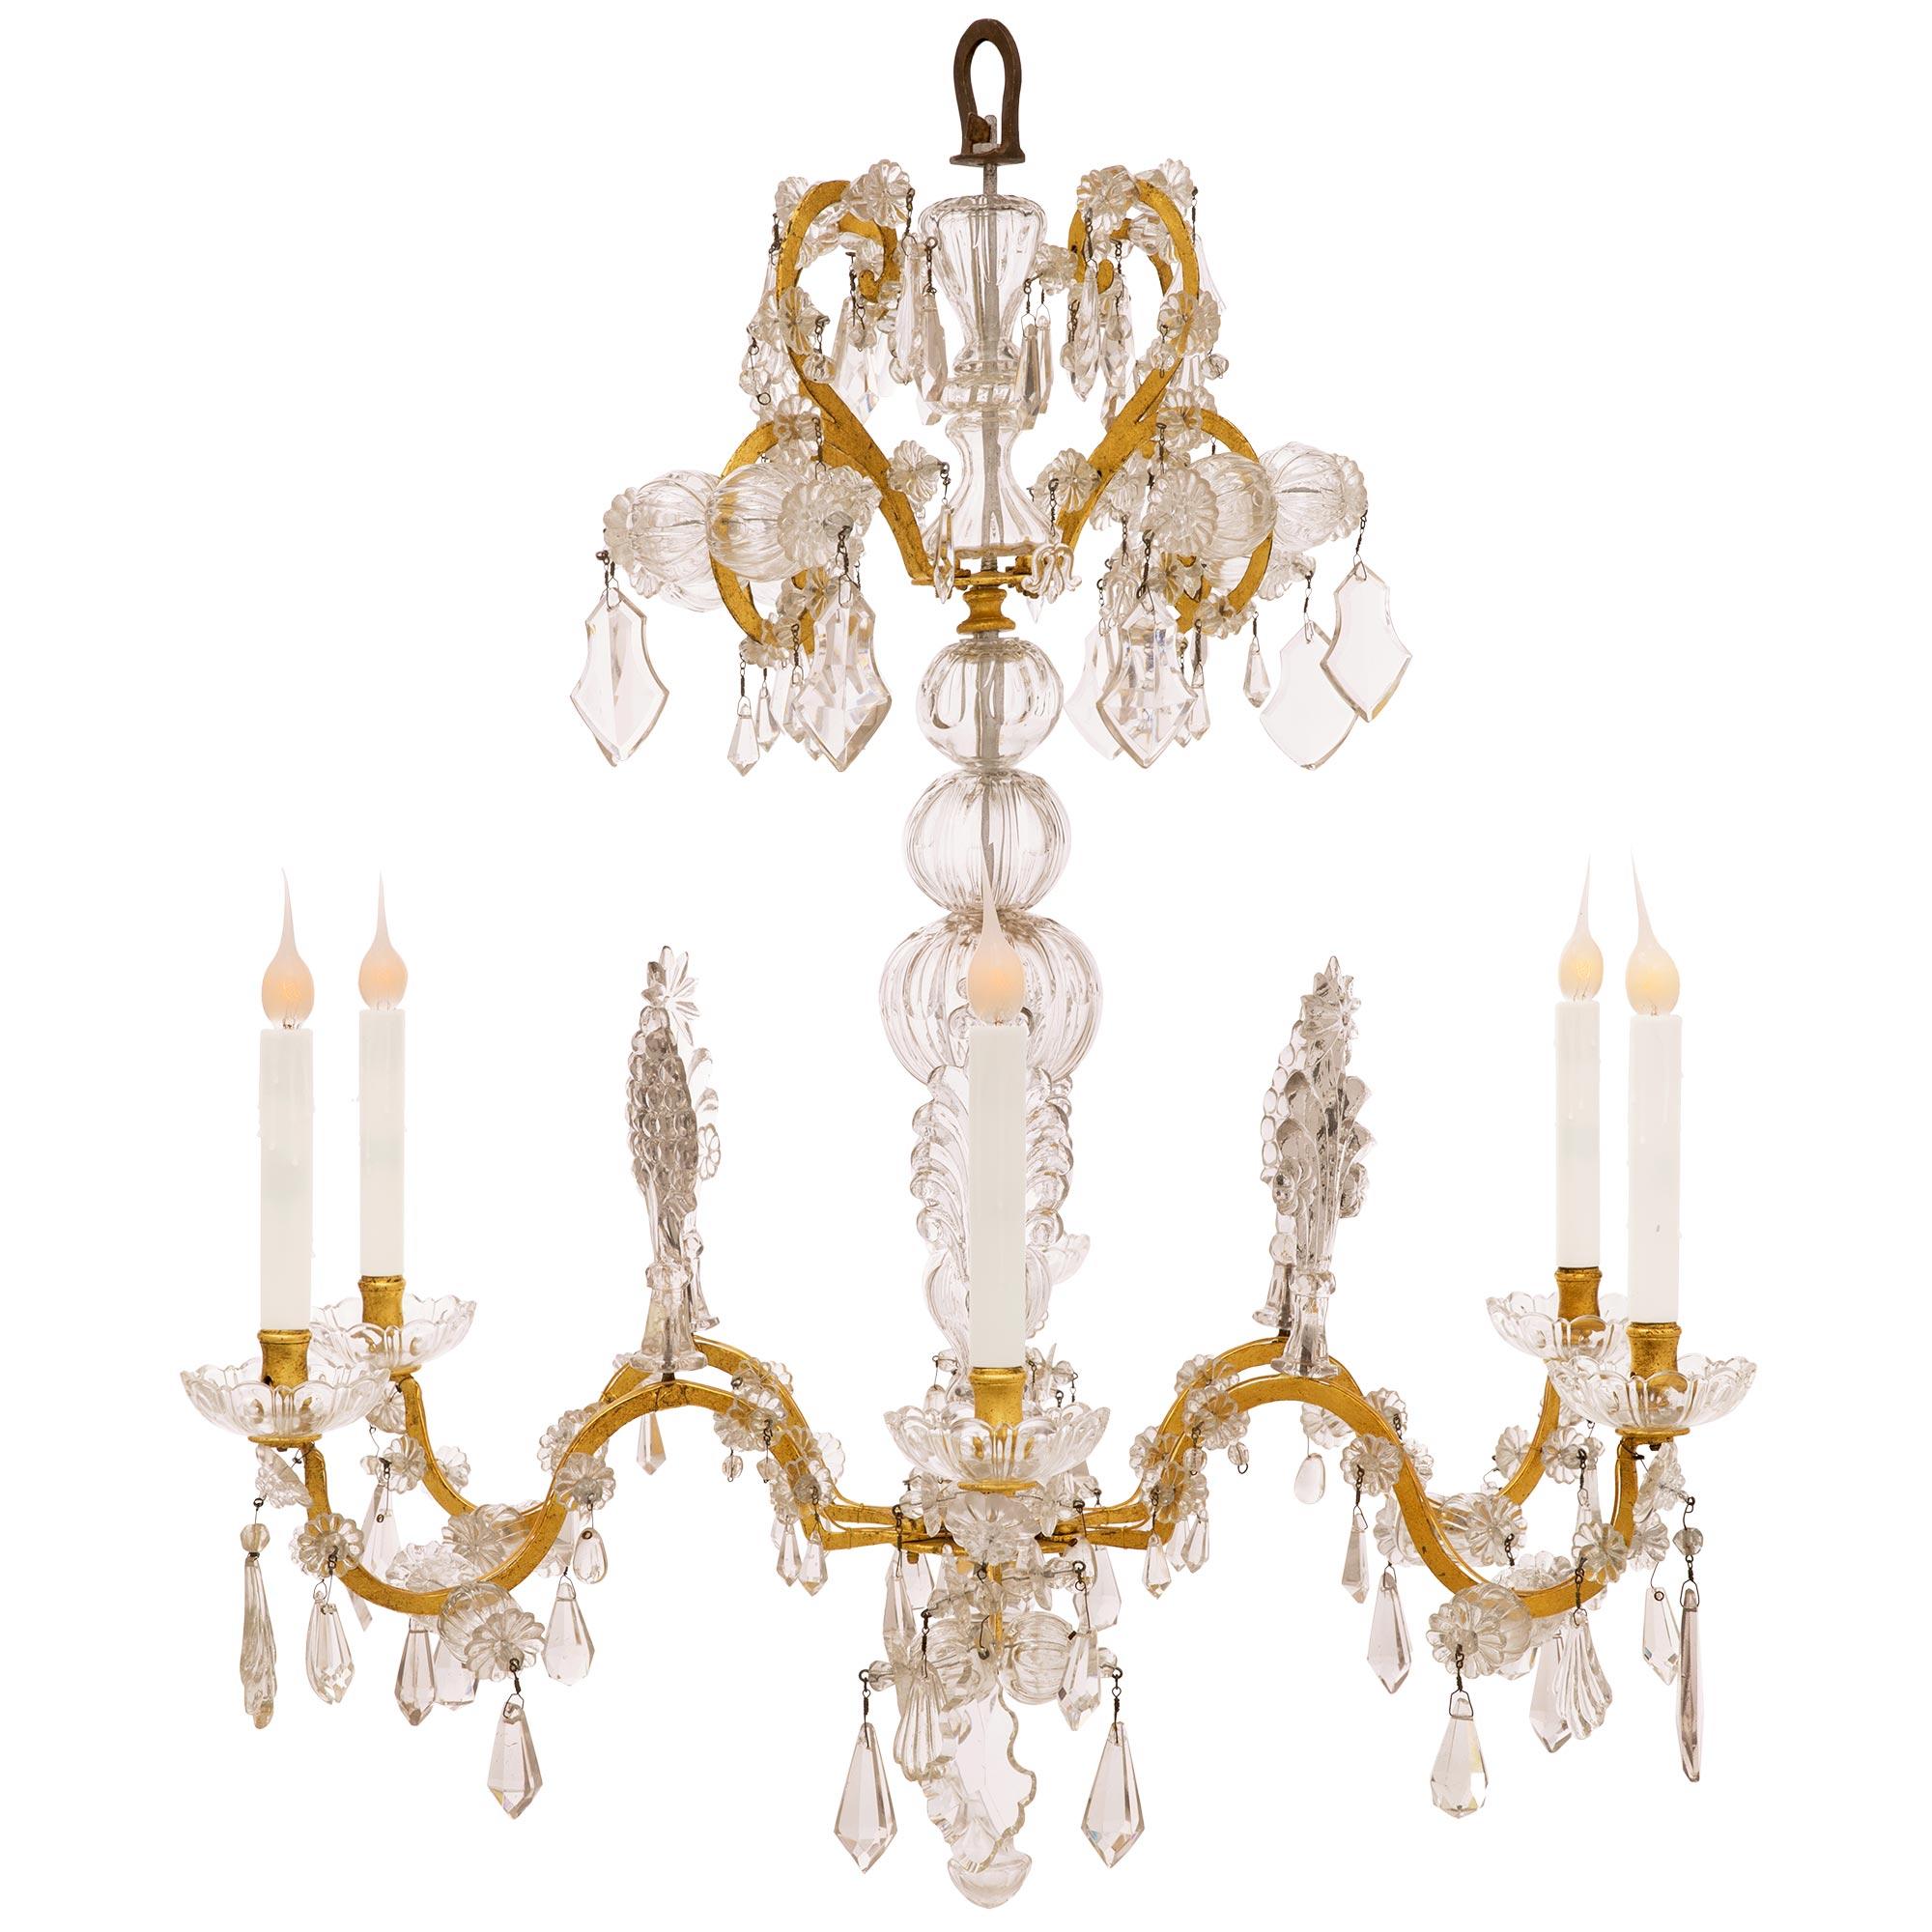 Pair Of Italian 18th Century Venetian St. Gilt Metal And Crystal Chandeliers In Good Condition For Sale In West Palm Beach, FL